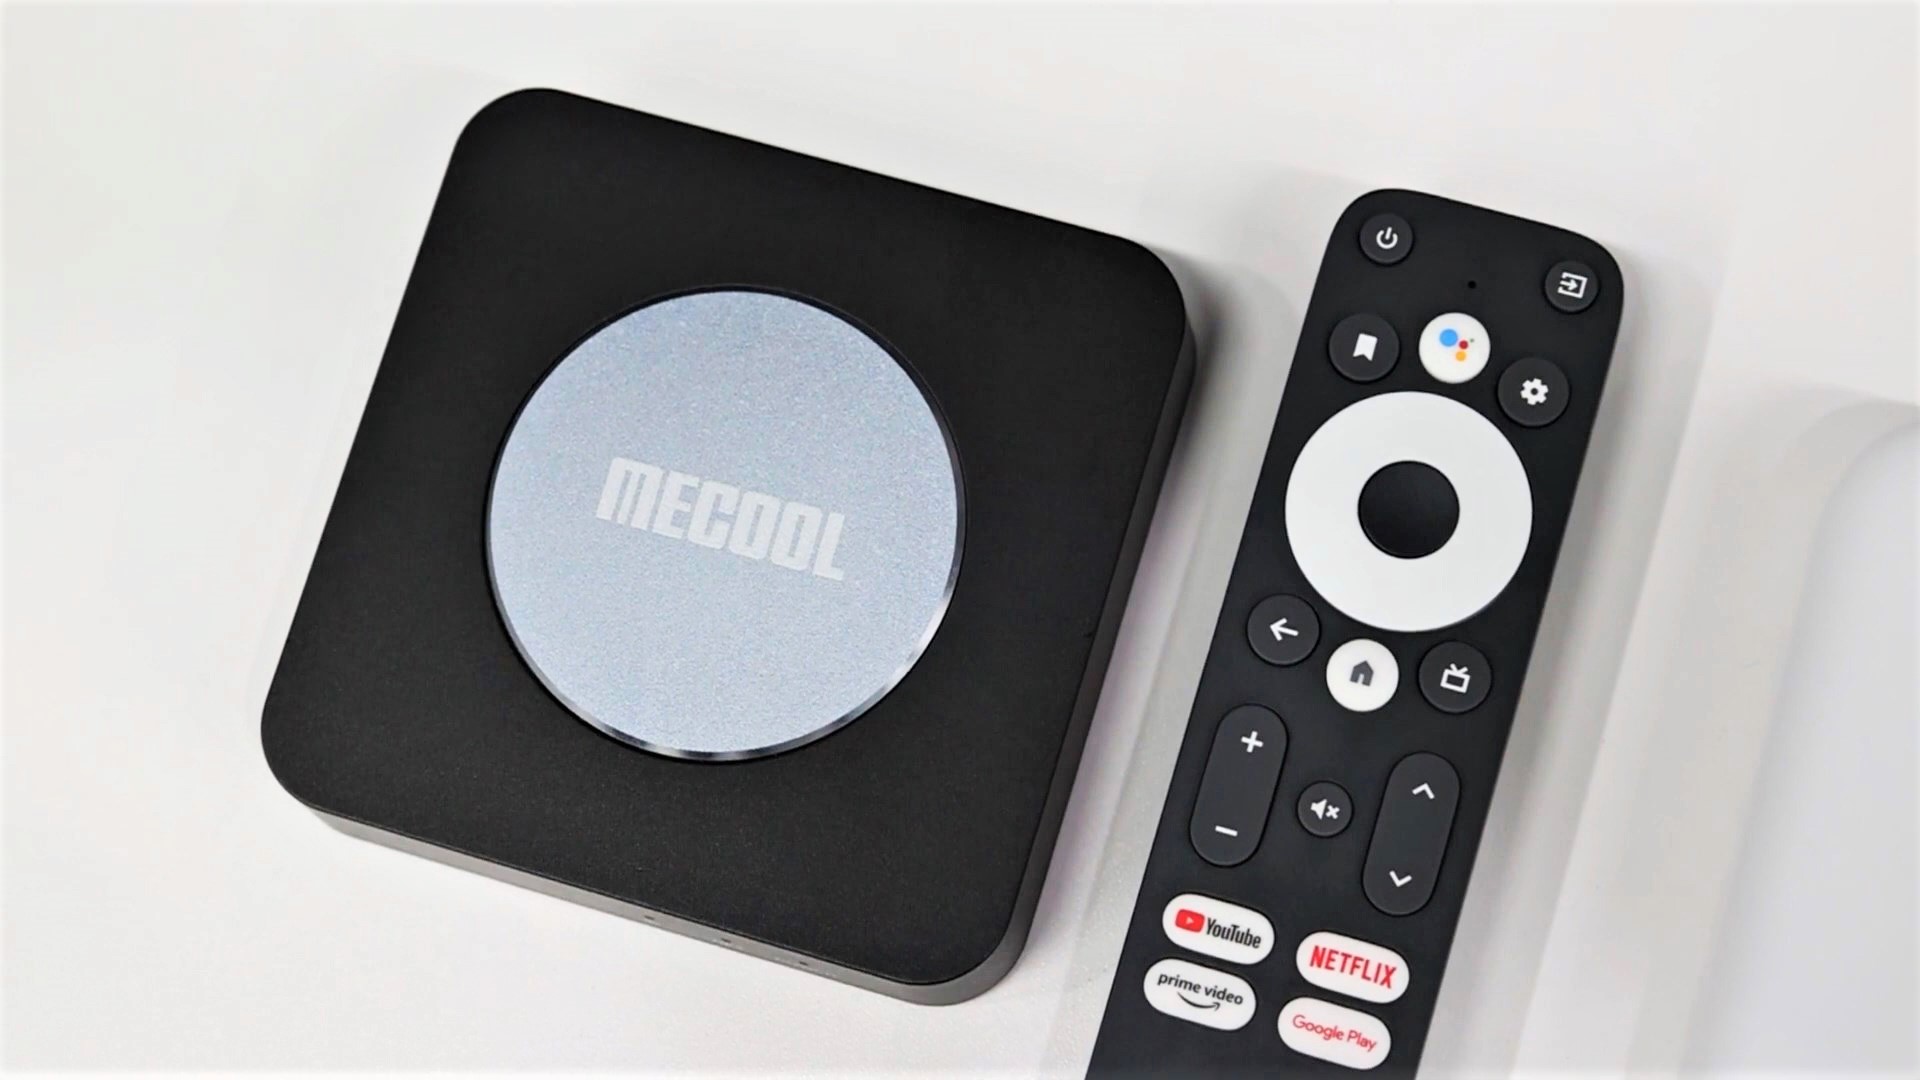 Mecool KM2 Plus Review - New Upgrade For TV Box With Google Certificate